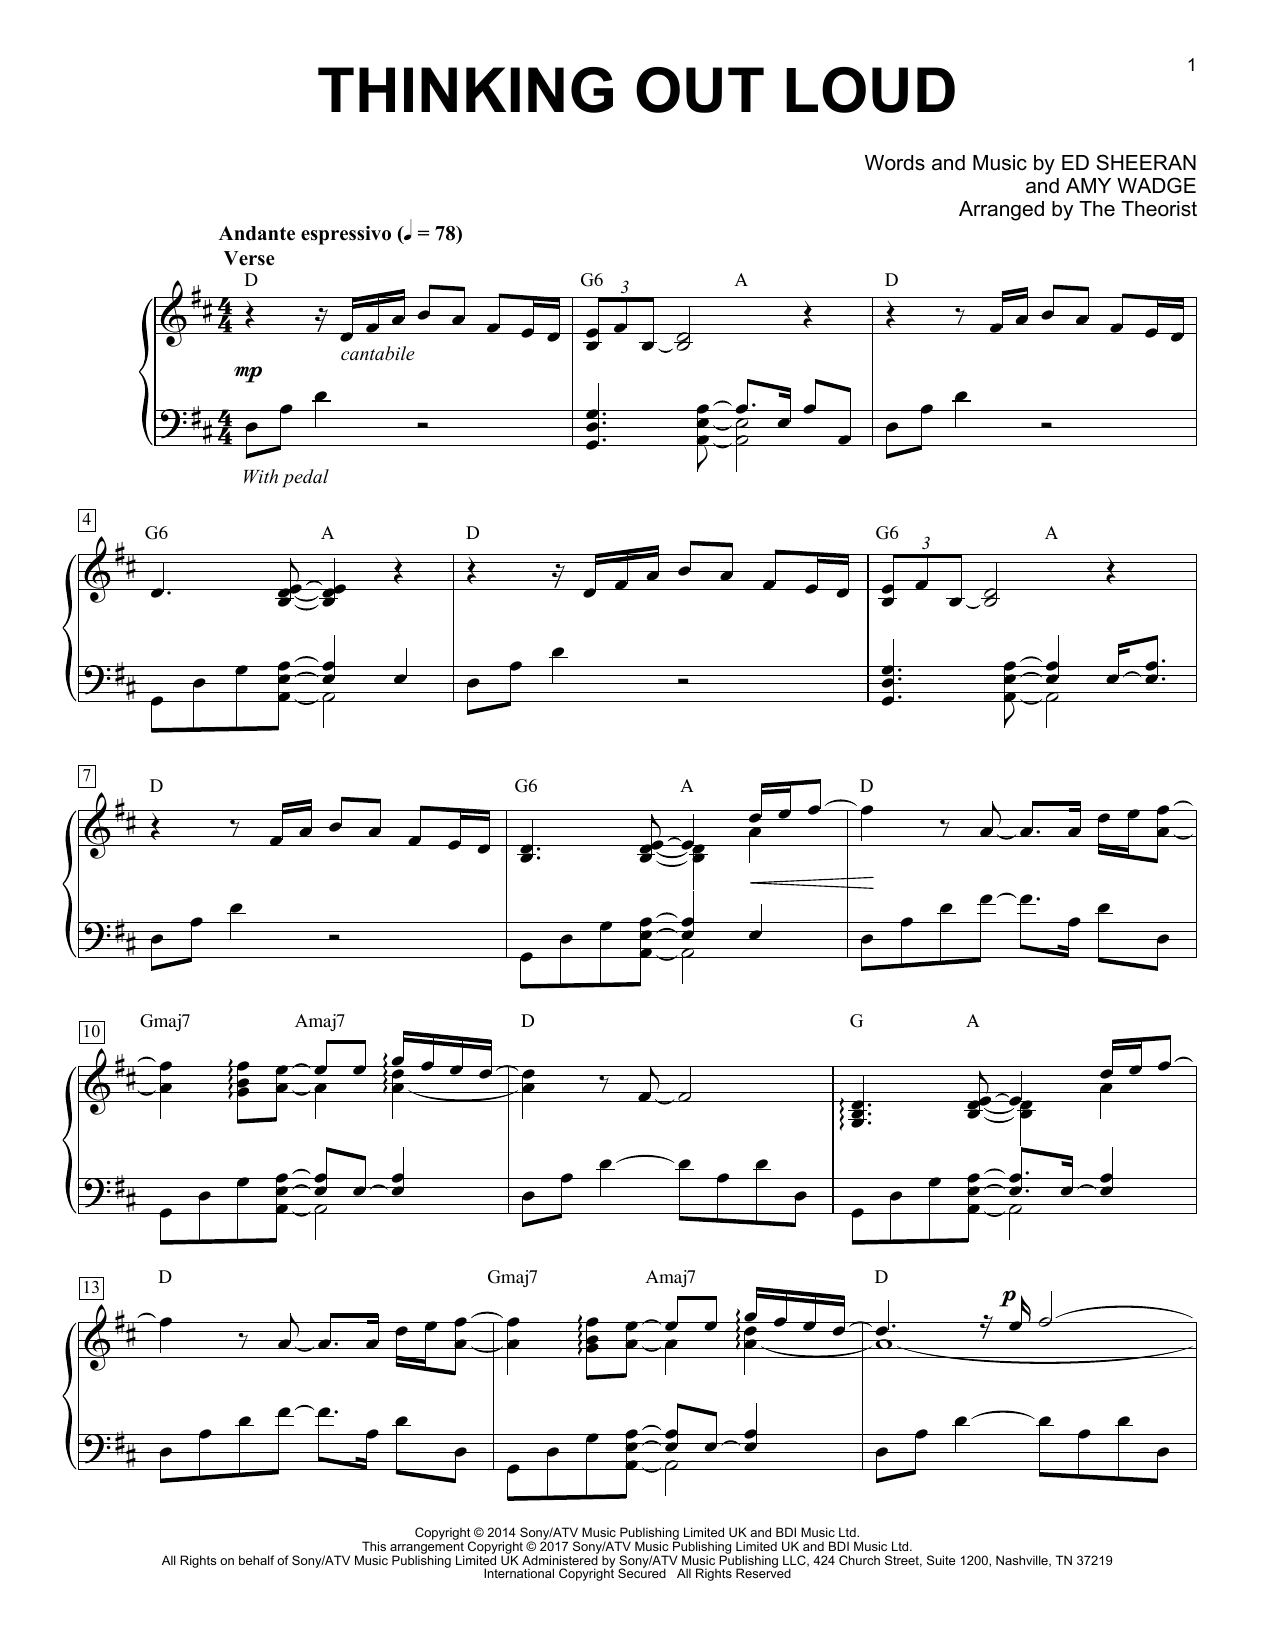 Download The Theorist Thinking Out Loud Sheet Music